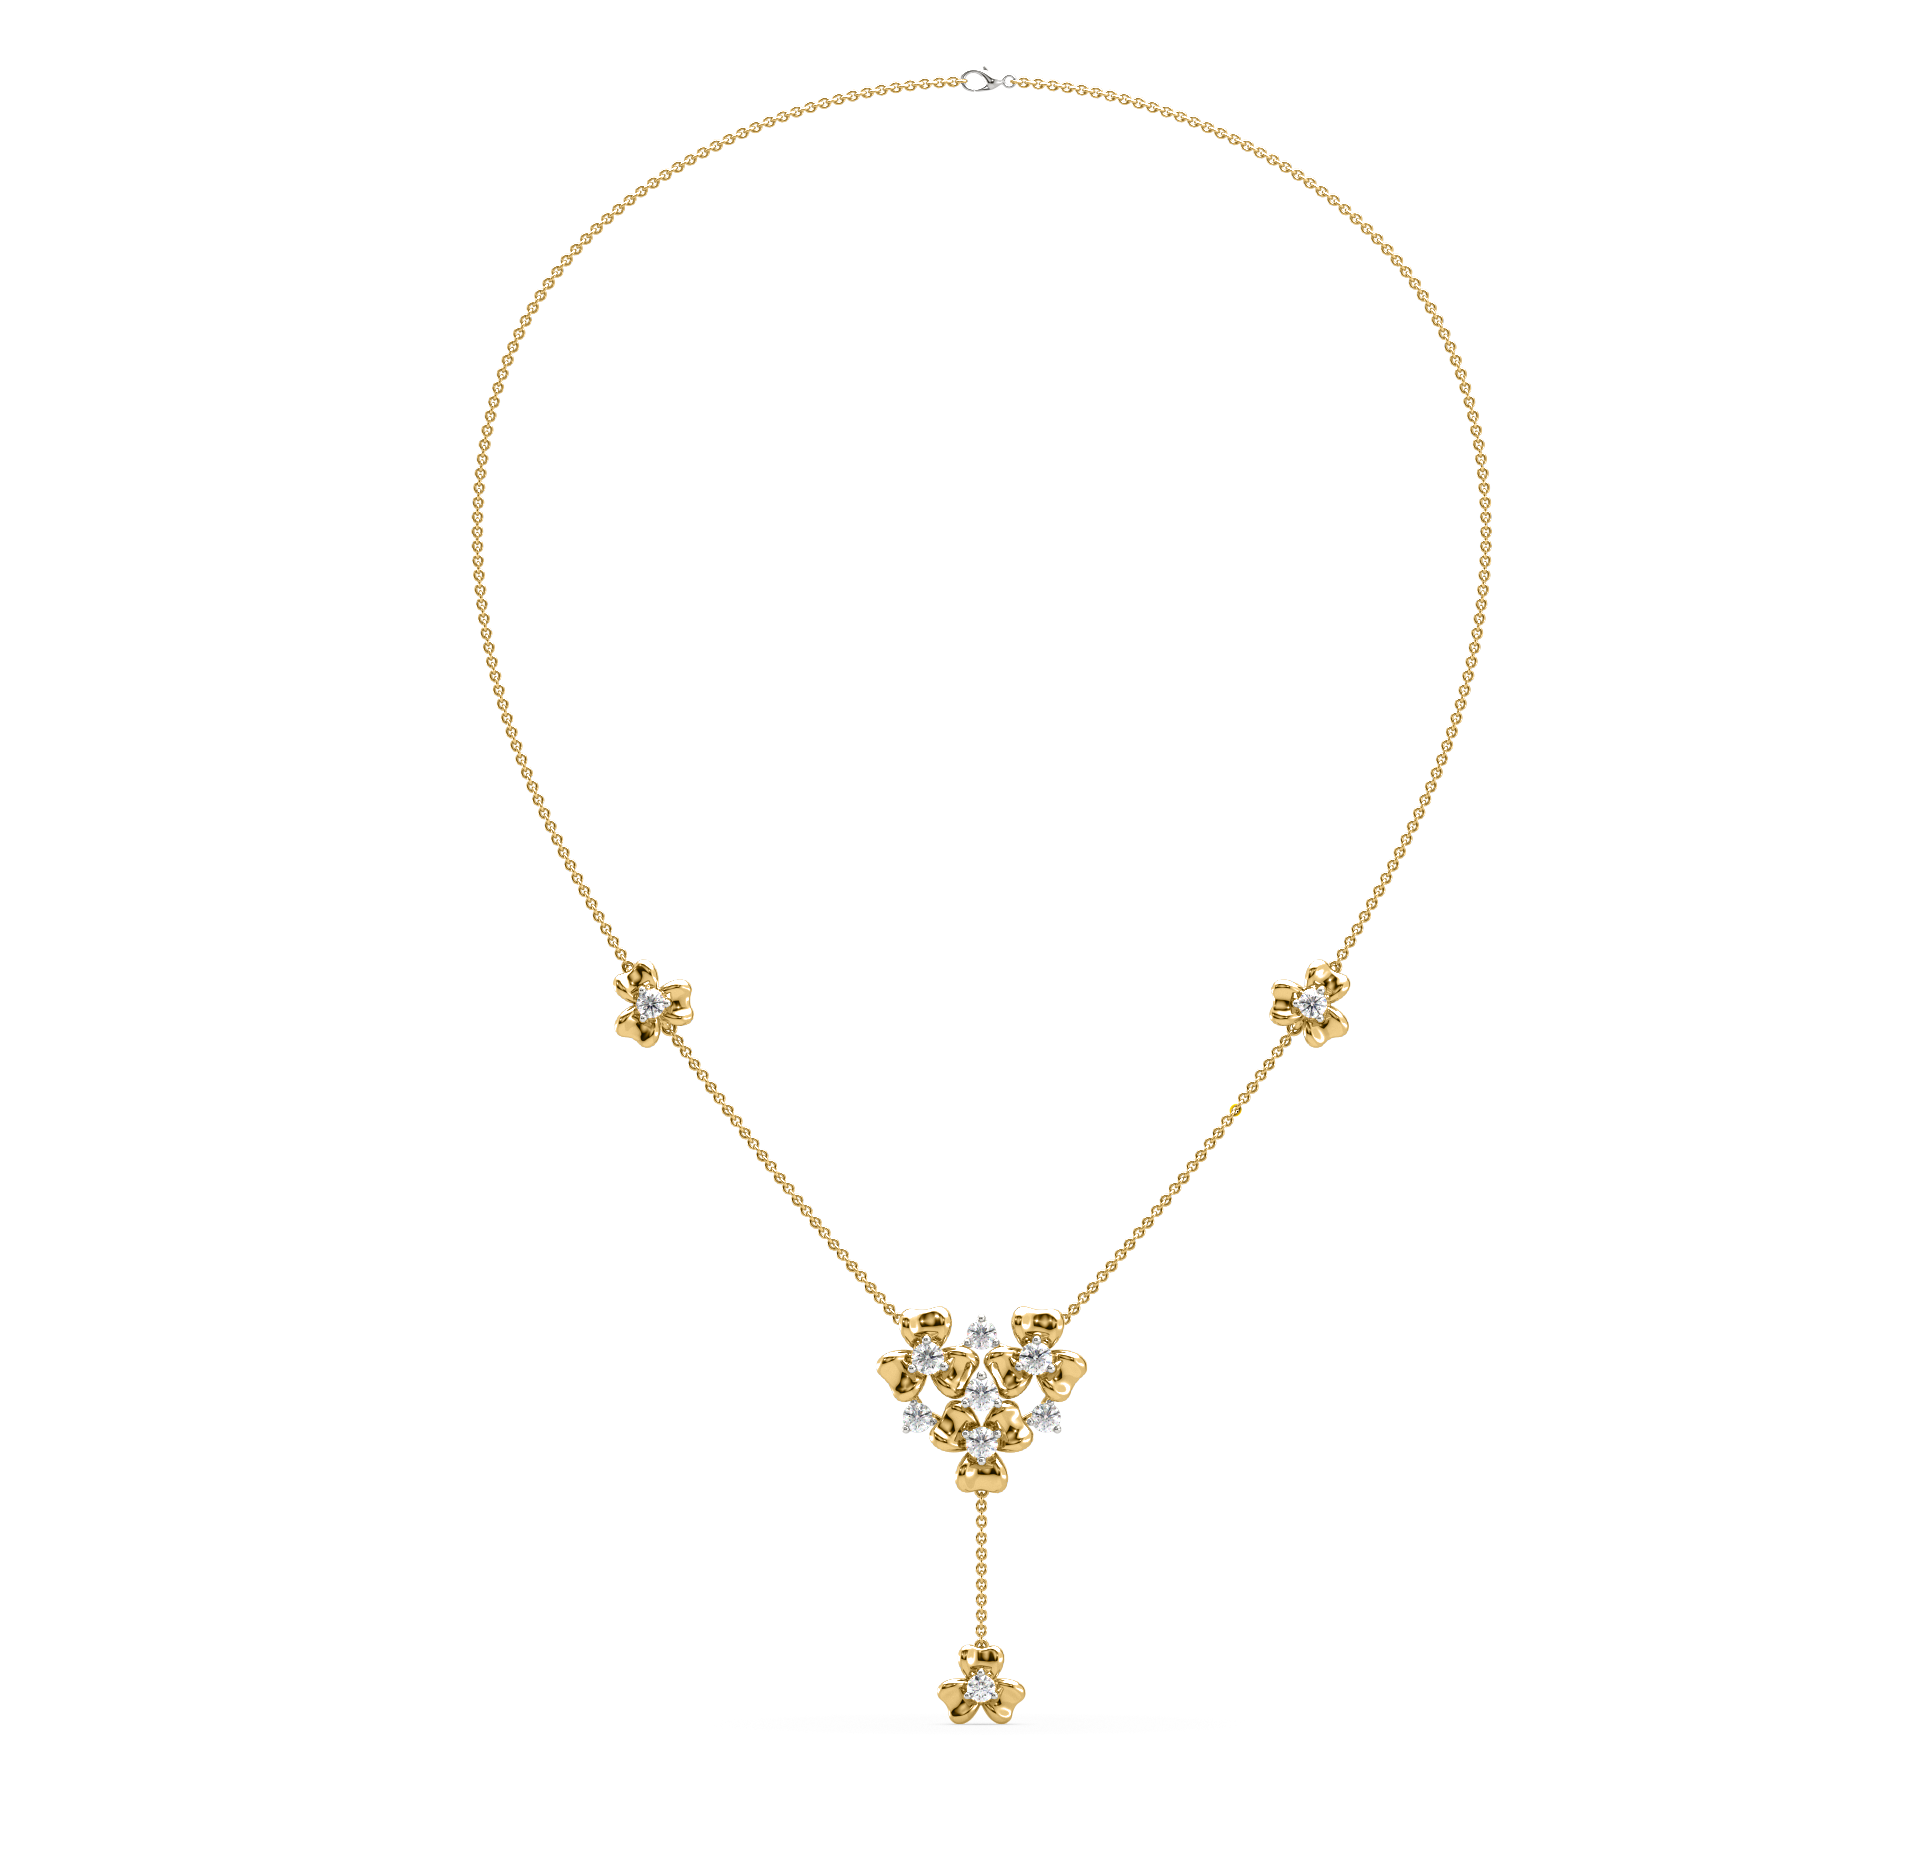 Diana Floral Necklace